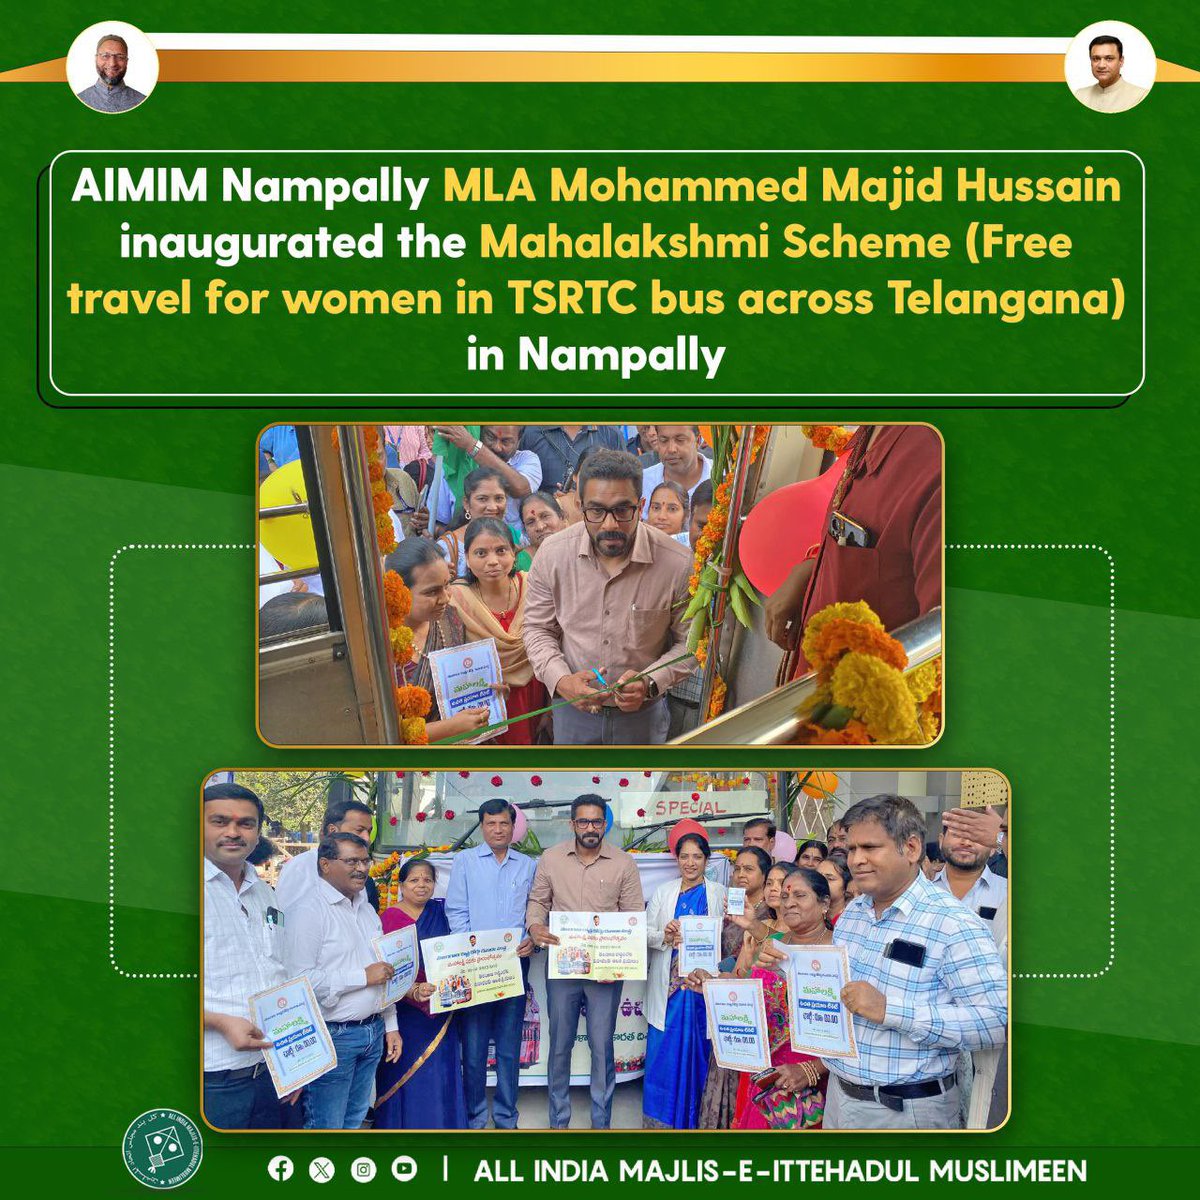 AIMIM Nampally MLA Mohammed Majid Hussain inaugurated the Mahalakshmi scheme (Free travel for women in TSRTC bus across Telangana) in the Nampally assembly constituency.

#AIMIM #majlis #ittehad #nampallyconstituency #MajidHussain #MahaLakshmiScheme #tsrtc #OurWorkIsOurIdentity